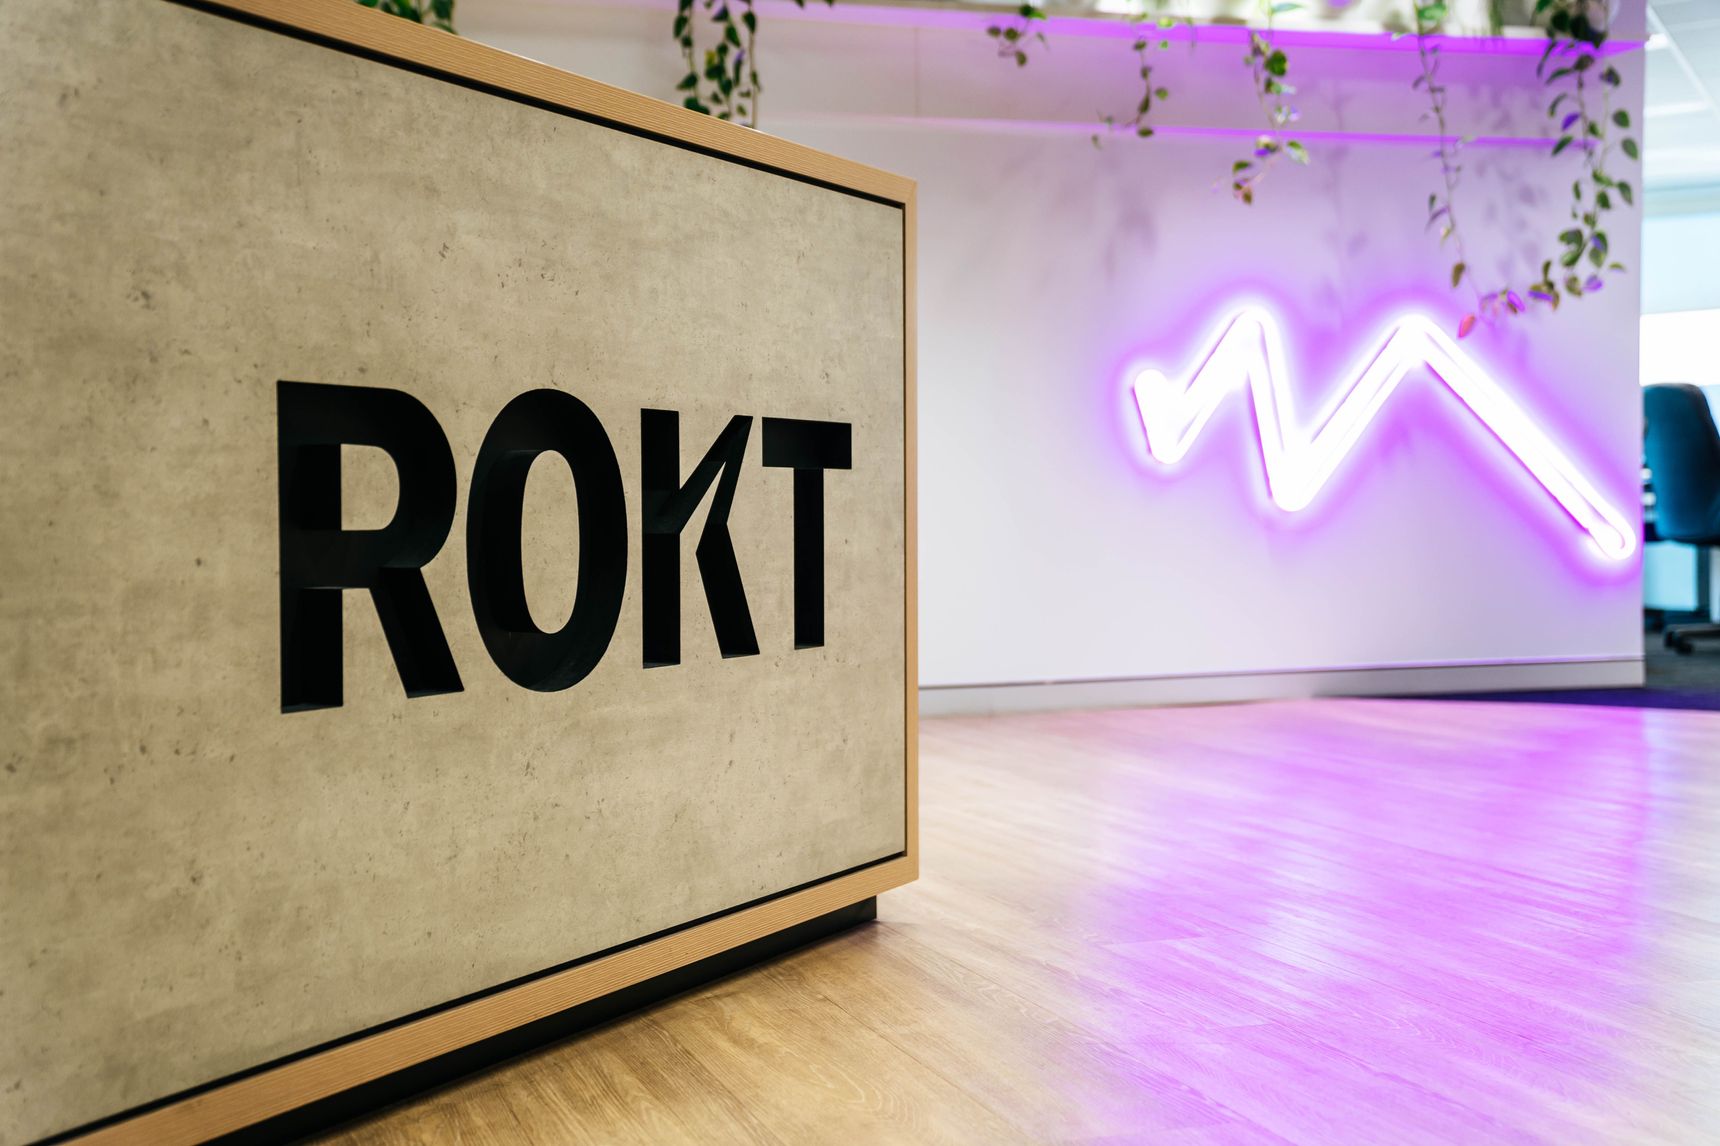 Rokt Raises $325 Million as It Preps for Planned IPO